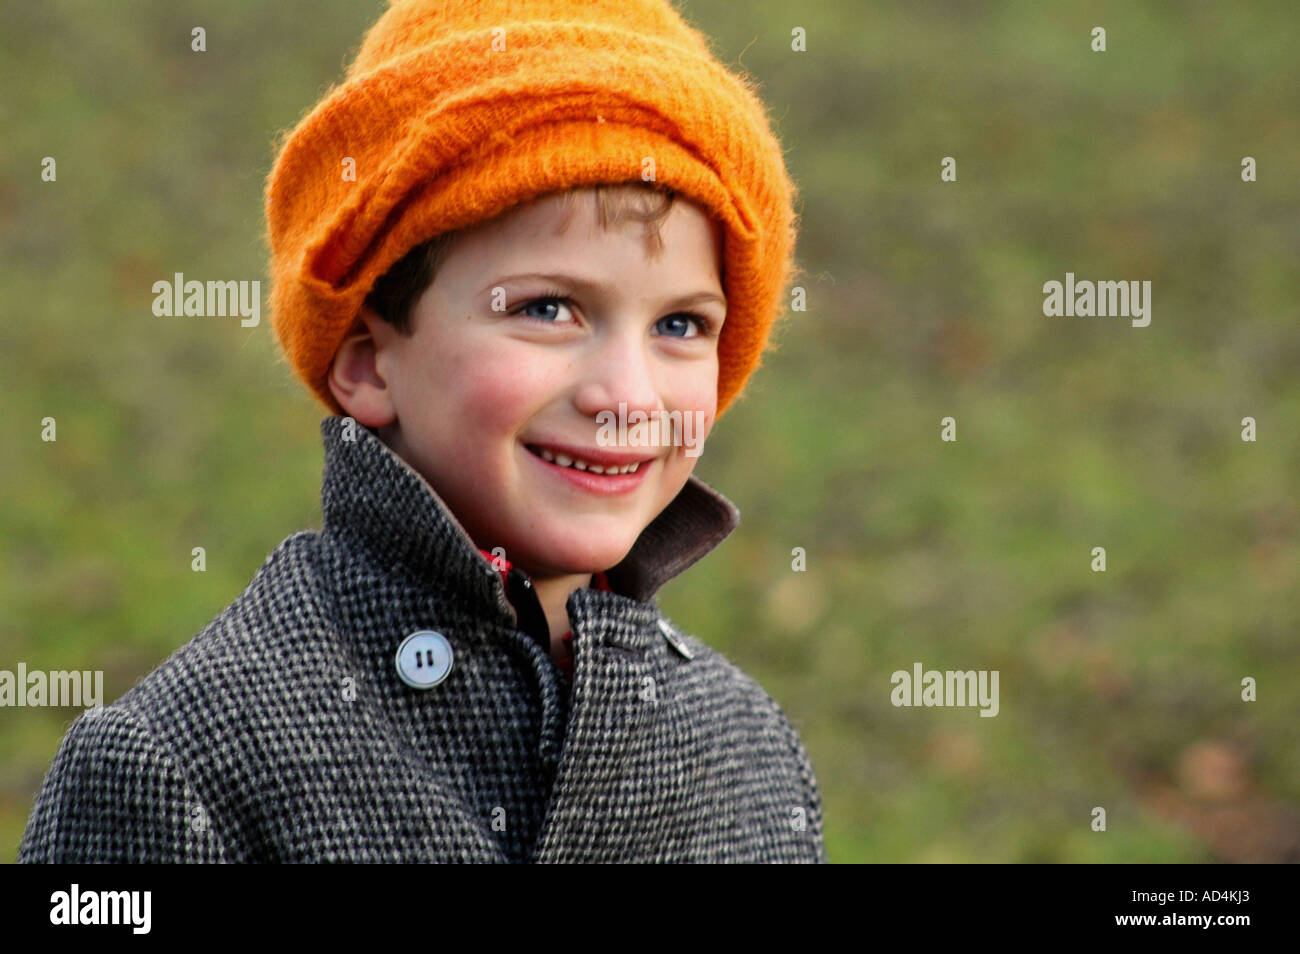 portrait of young boy smiling and wearing orange woollen hat and winter coat, outside on a winter's day Stock Photo